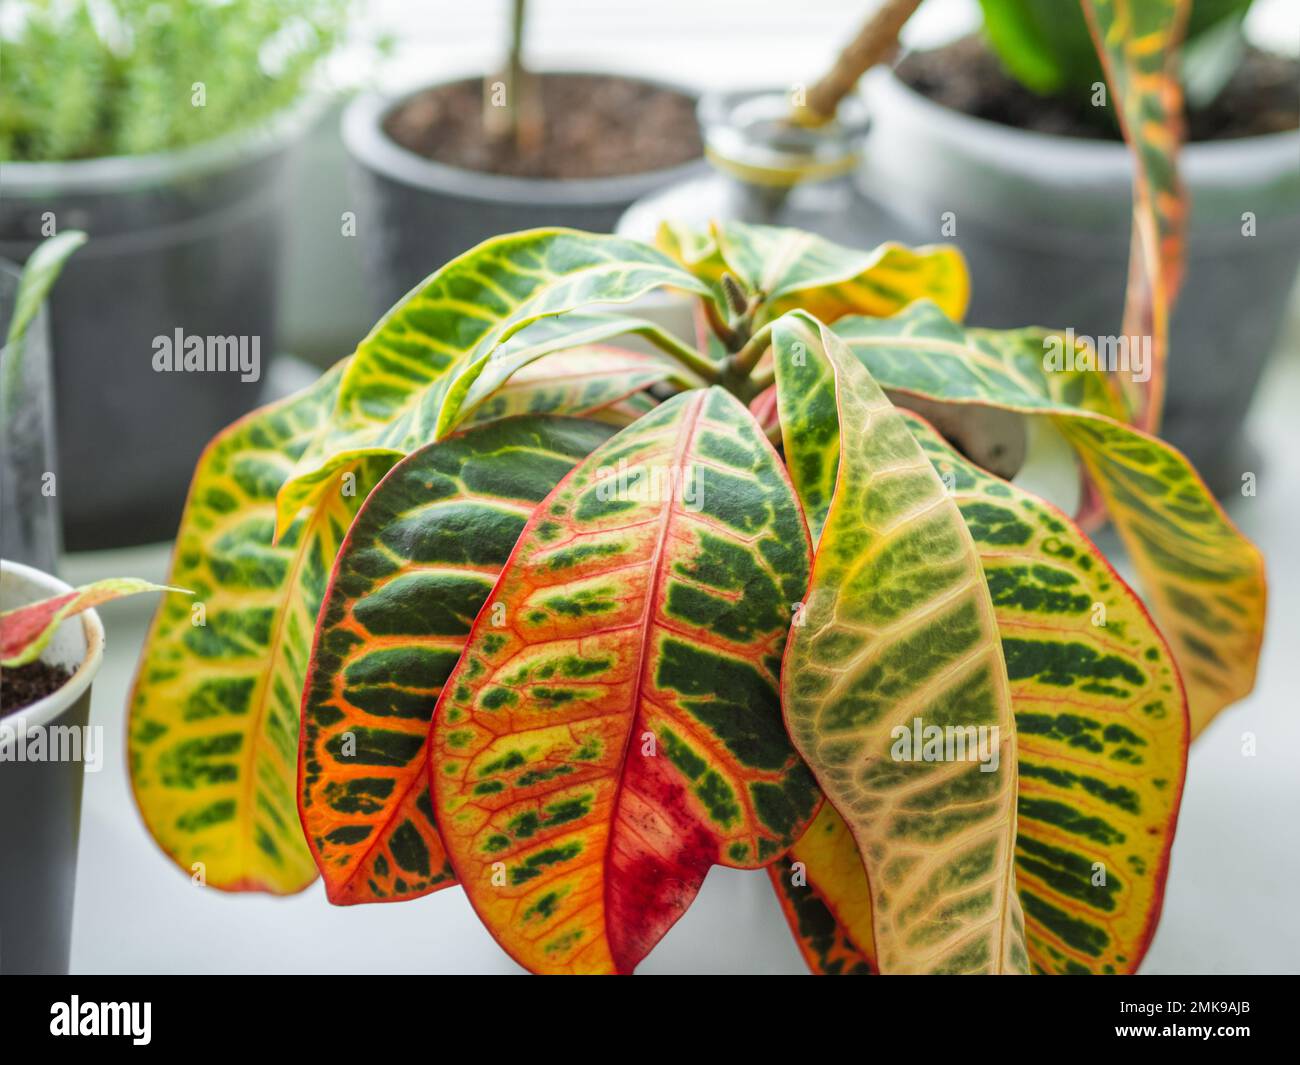 Colorful leaves of Codiaeum variegatum or fire croton. Growing flowering plants at home. Gardening on window sill as anti stress hobby. Stock Photo